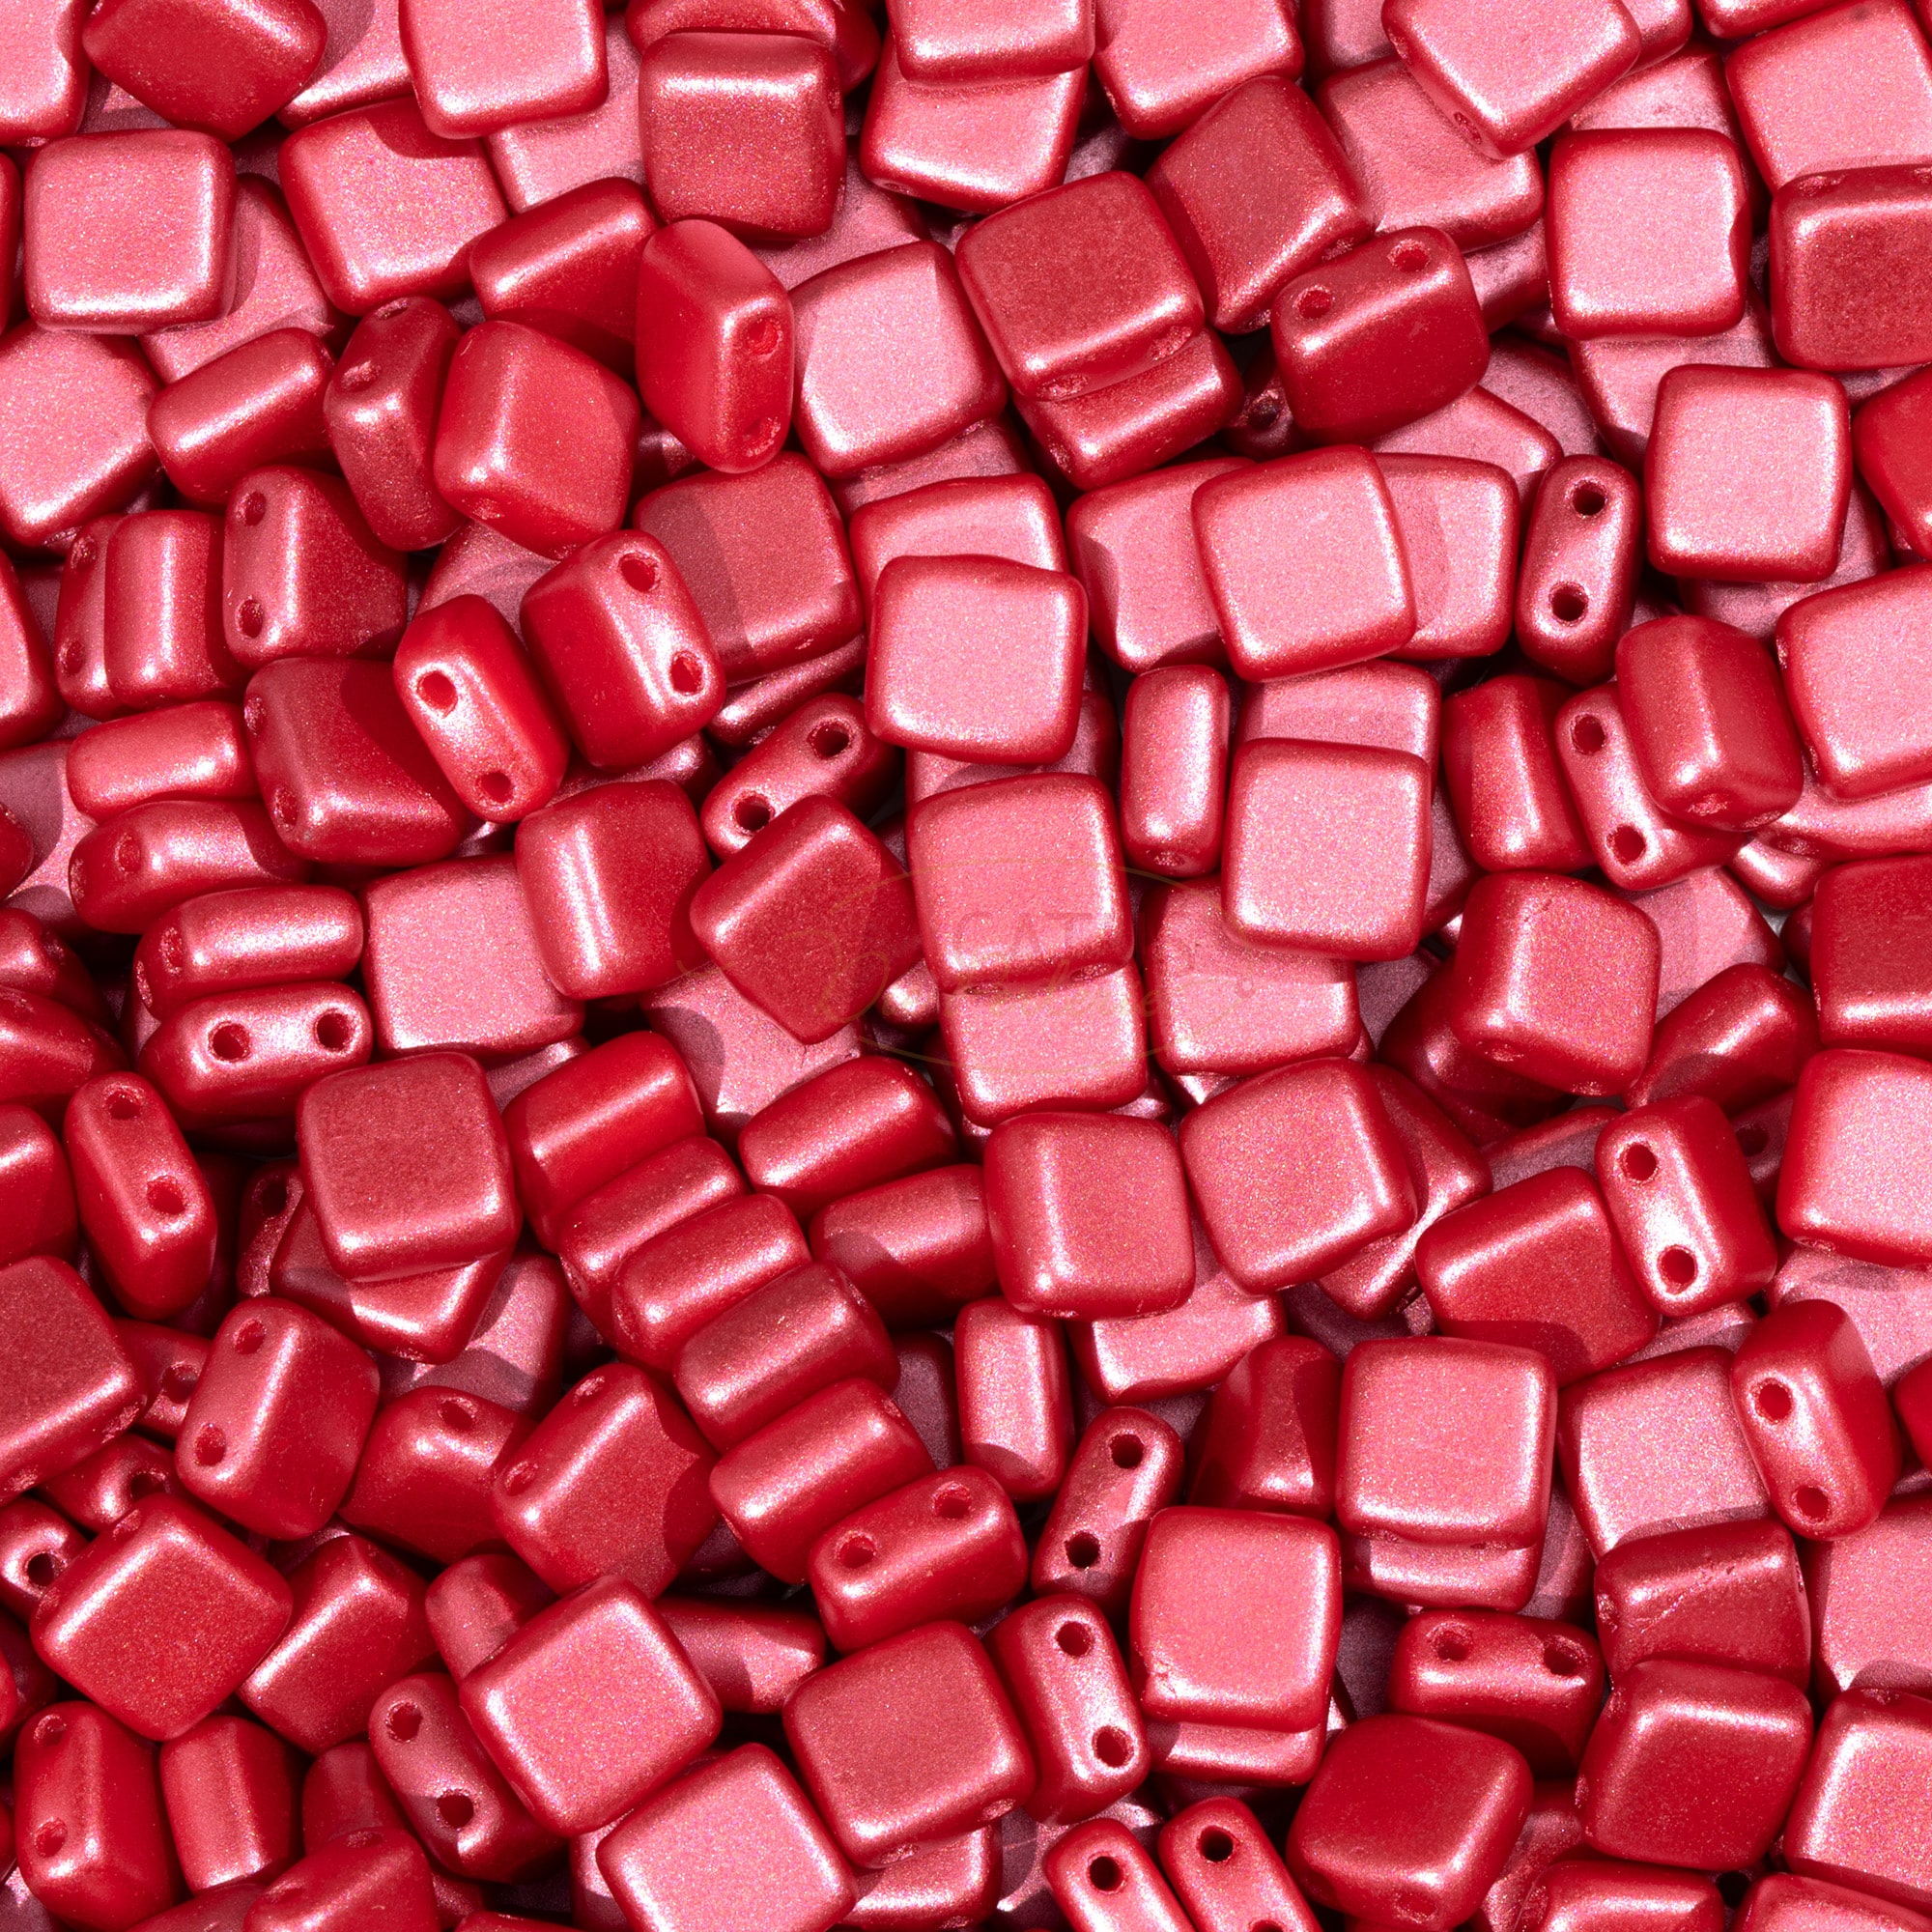 Square beads 6 x 6 x 3 mm color selection, 20 pieces